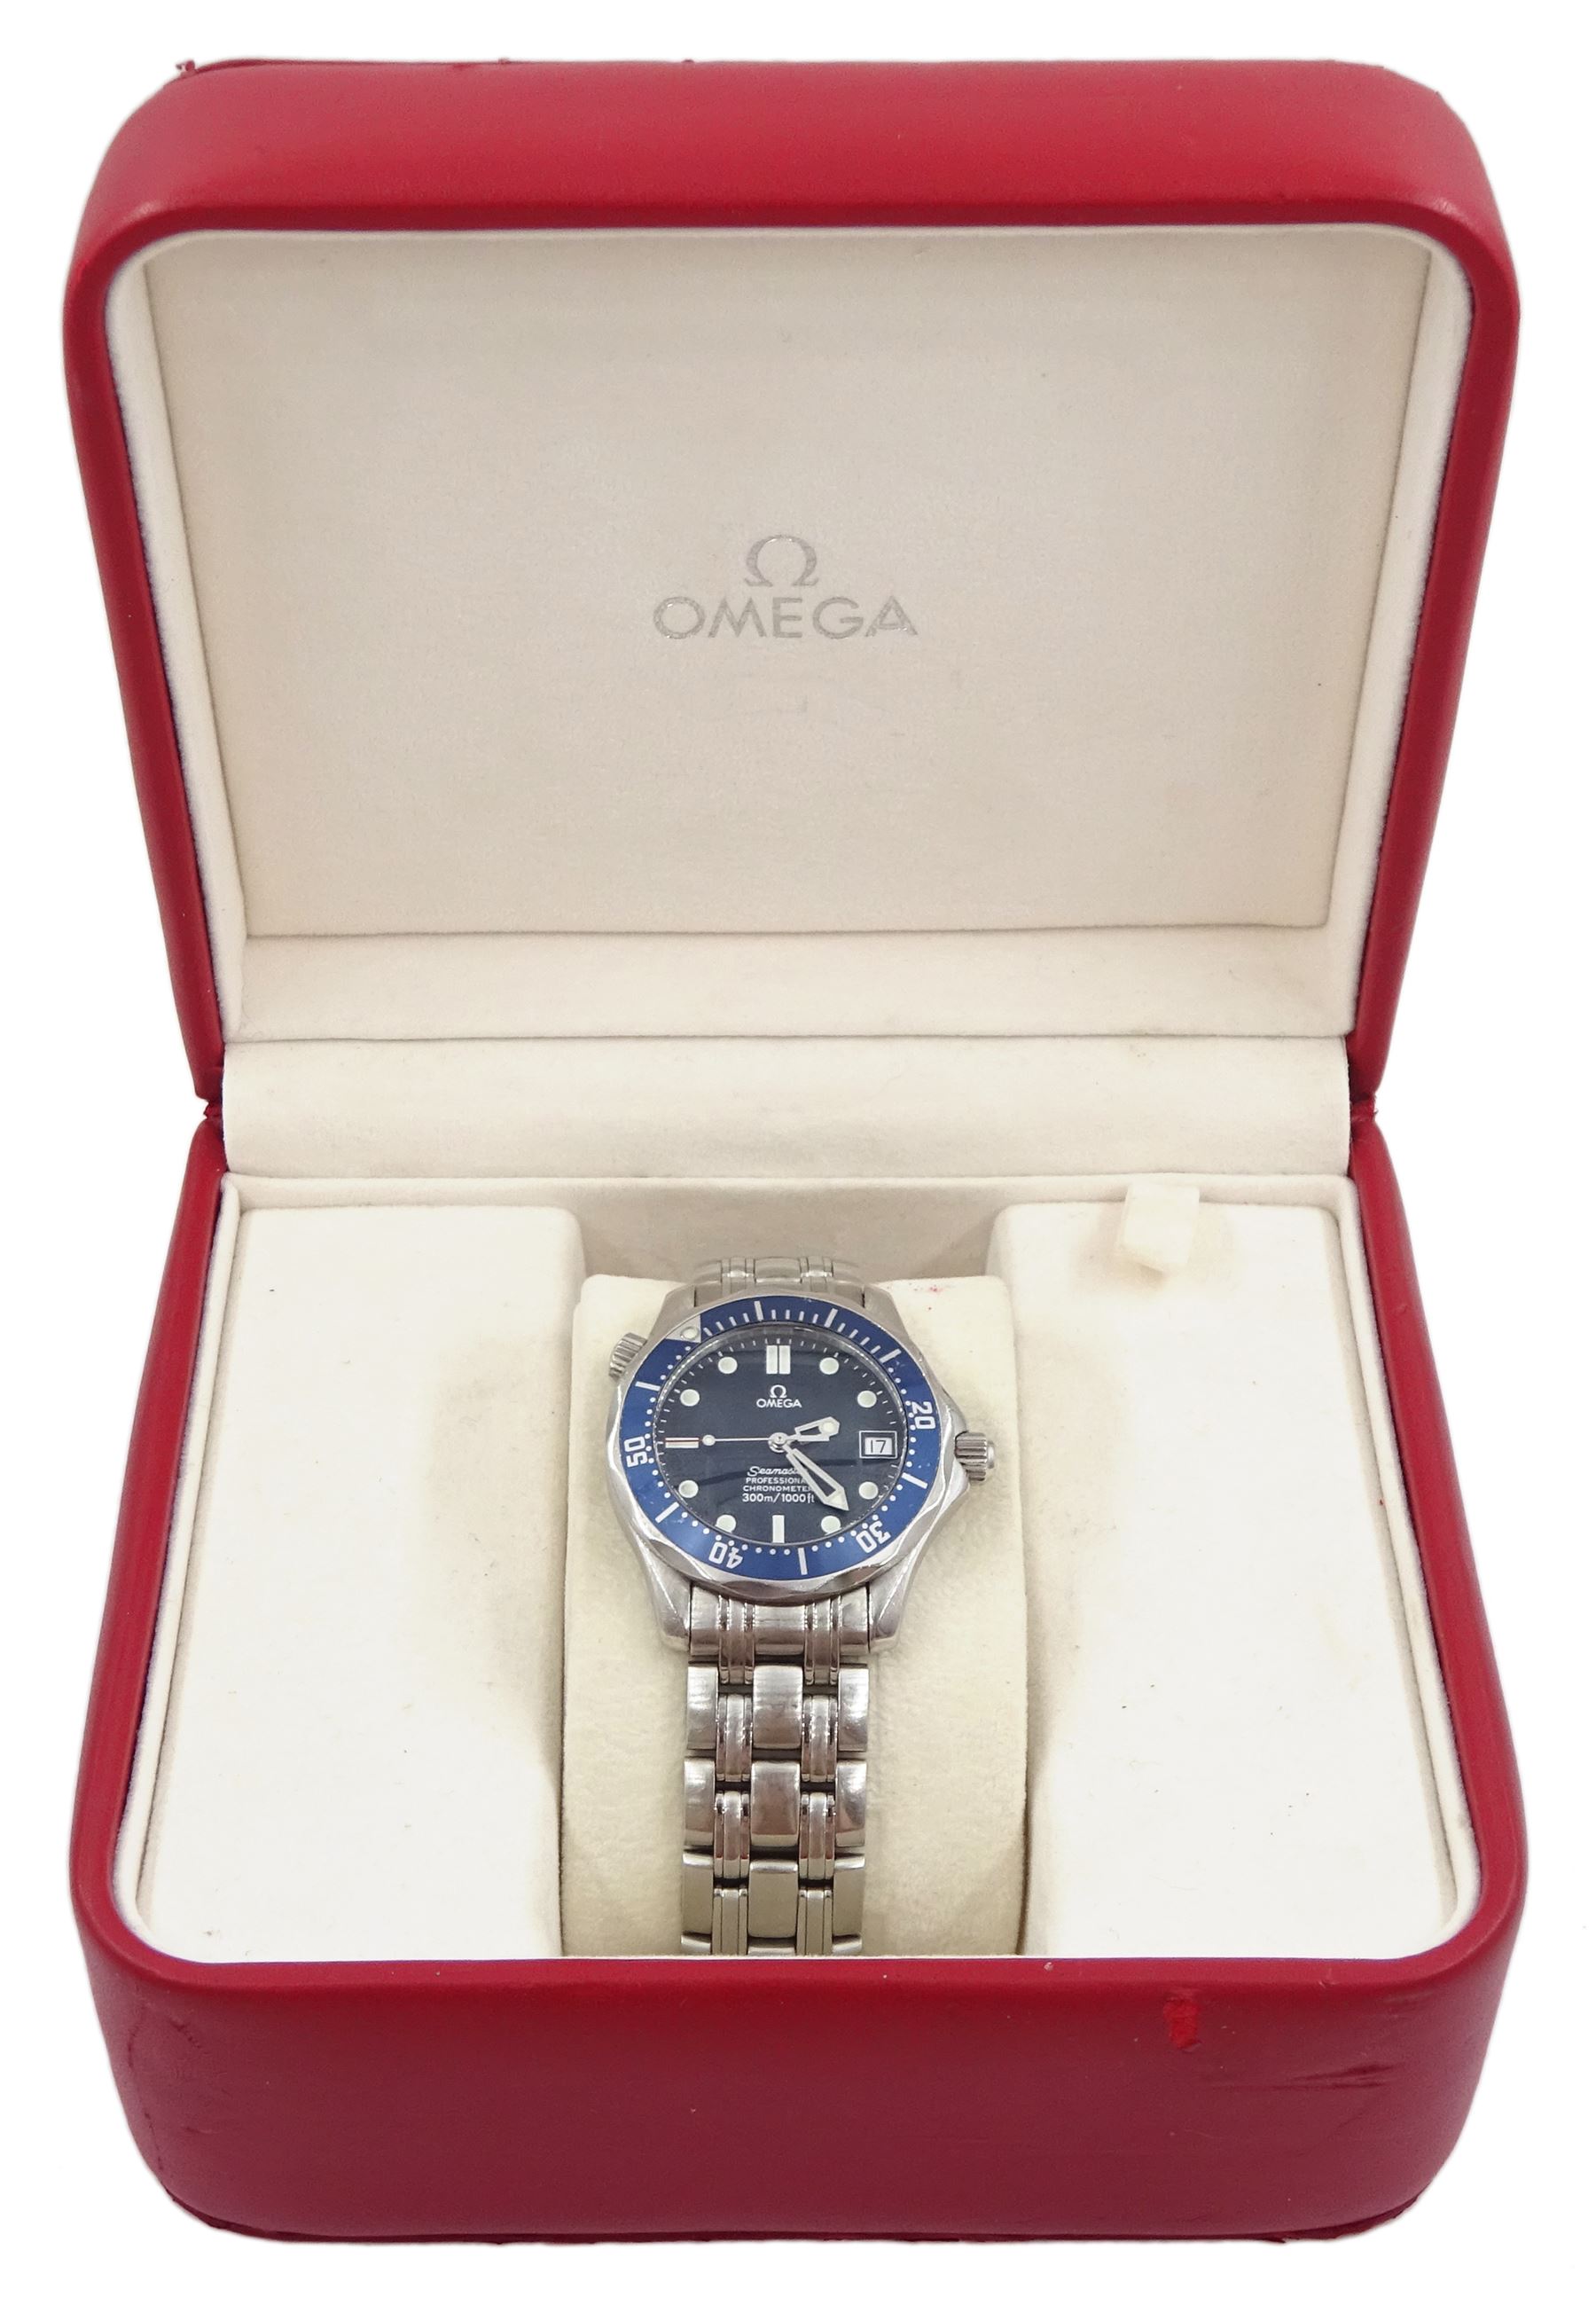 Omega Seamaster gentleman's stainless steel automatic wristwatch - Image 2 of 5